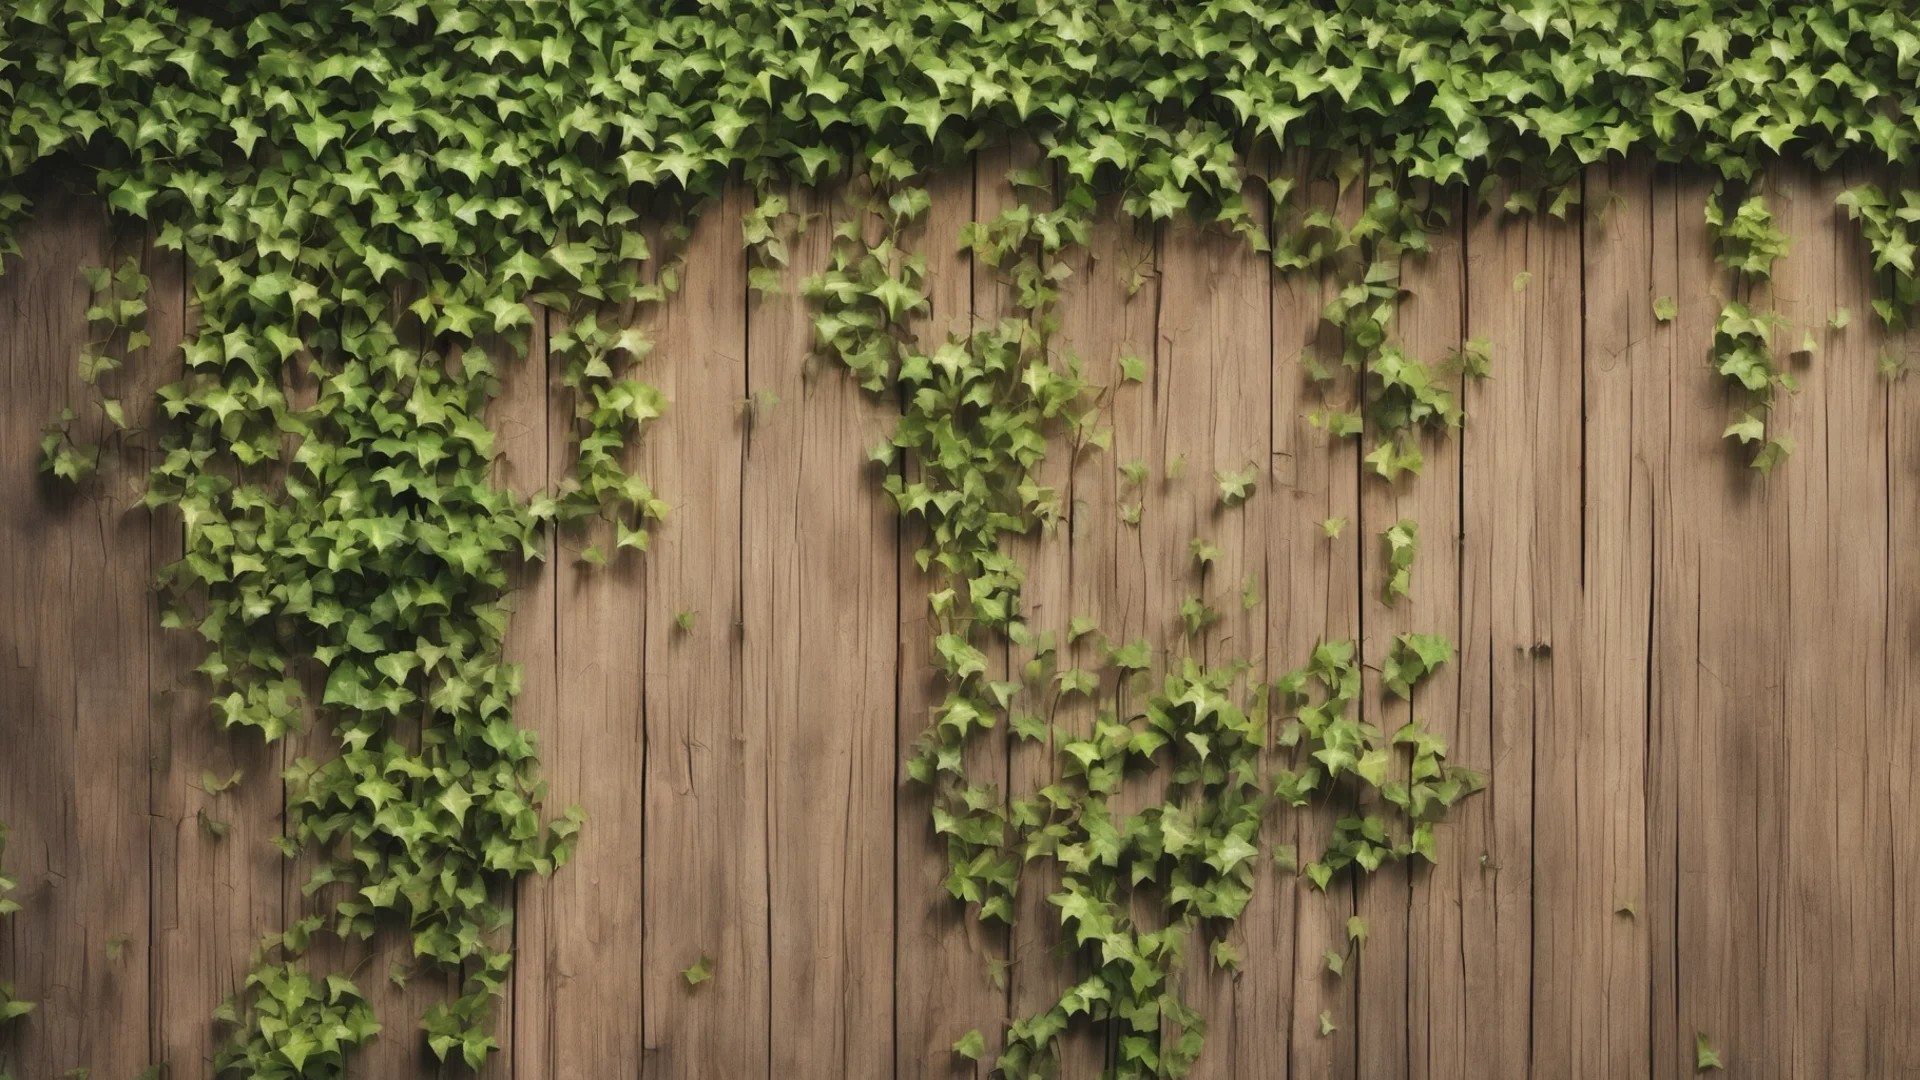 anime style ivy growing on a wood wall amazing awesome portrait 2 wide